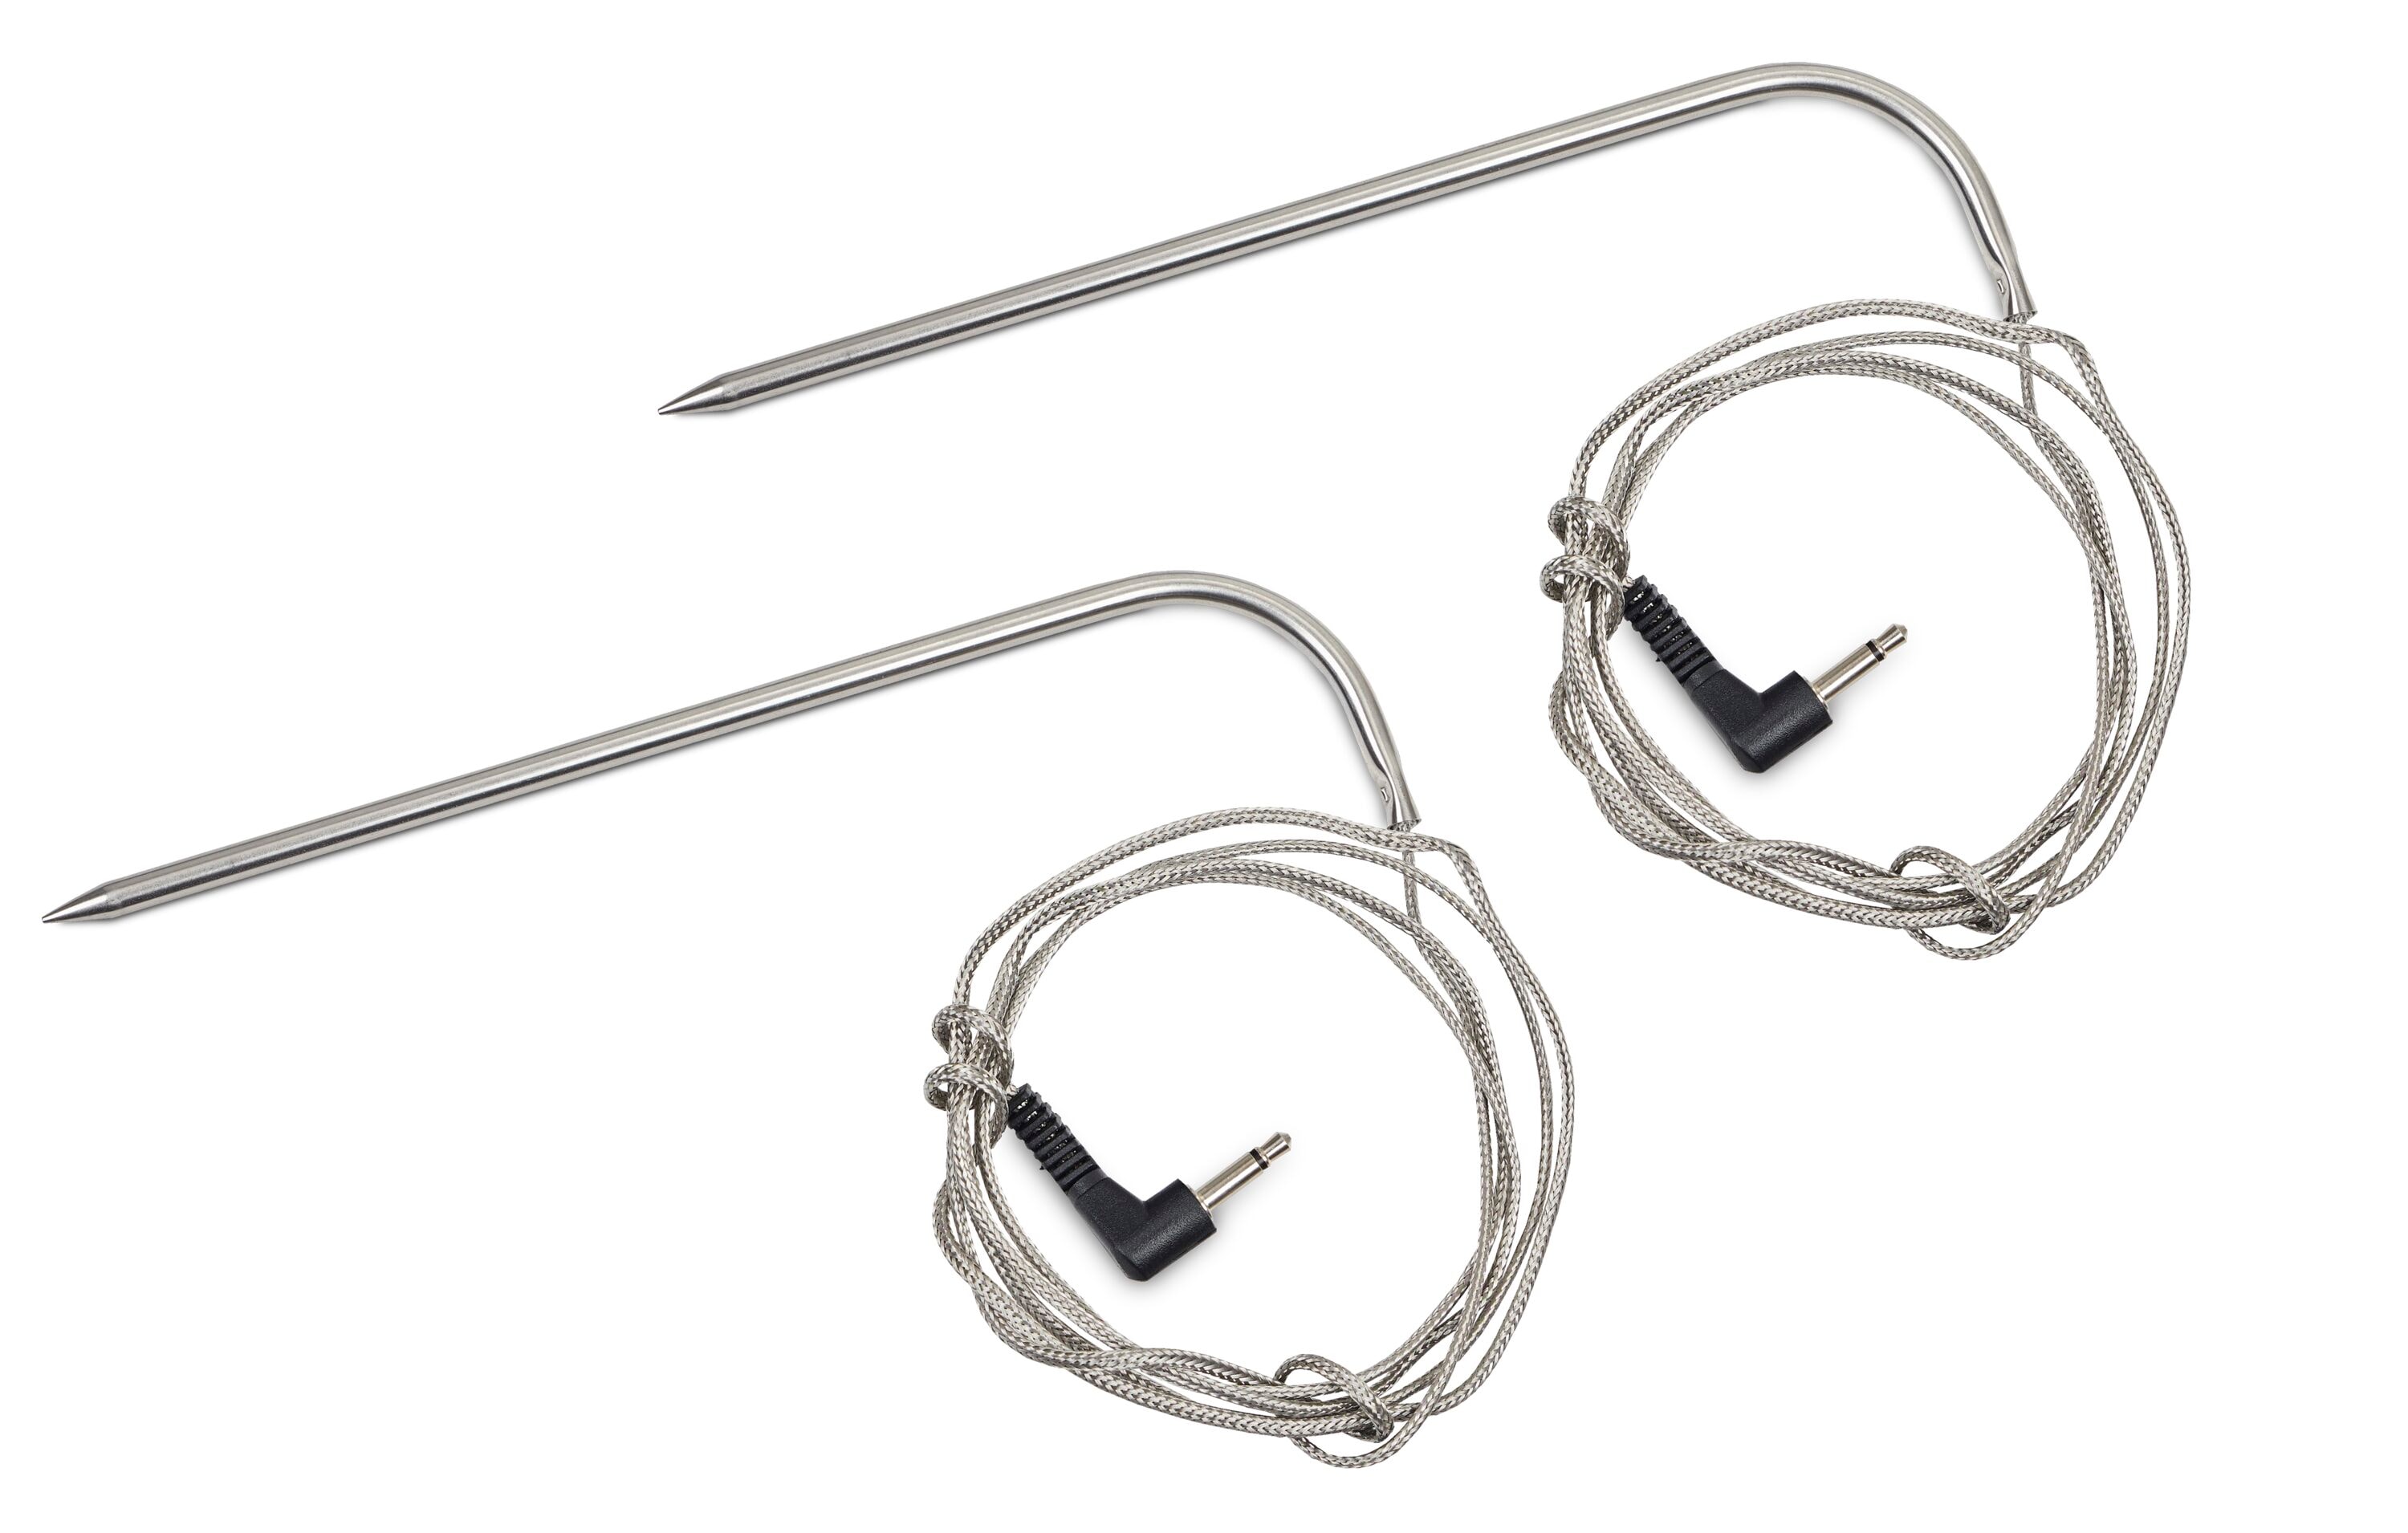 2 Pack Replacement Meat Probe for Traeger Pellet Grill Smokers Parts, 3.5mm  Plug